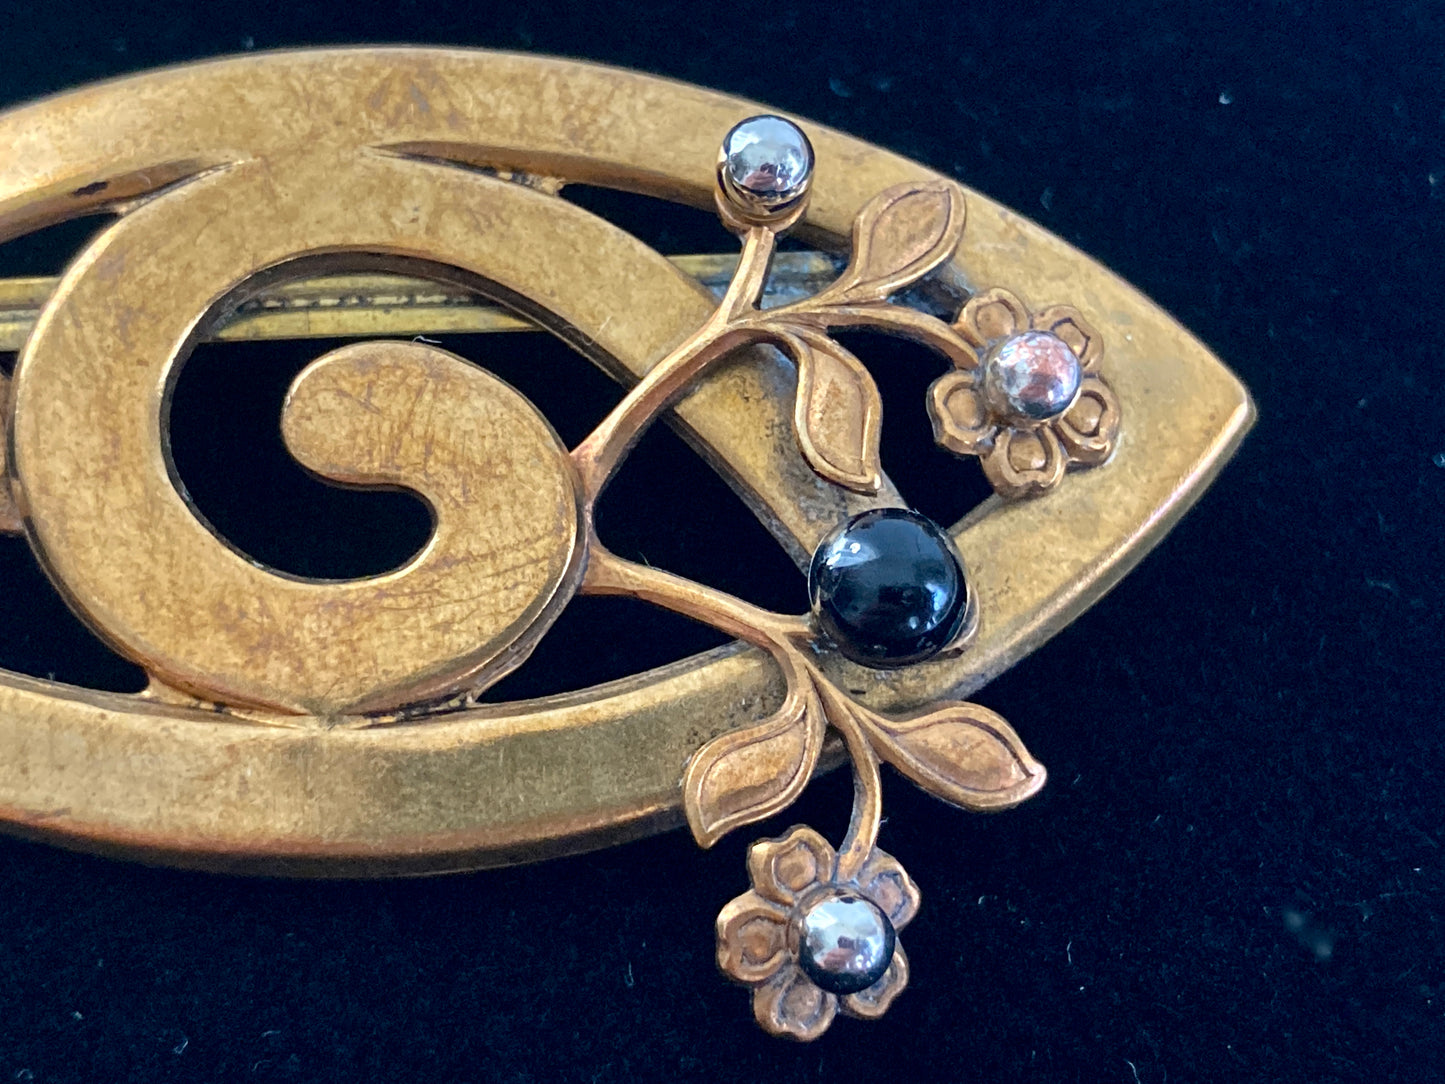 Antique stamped brass brooch with flowers